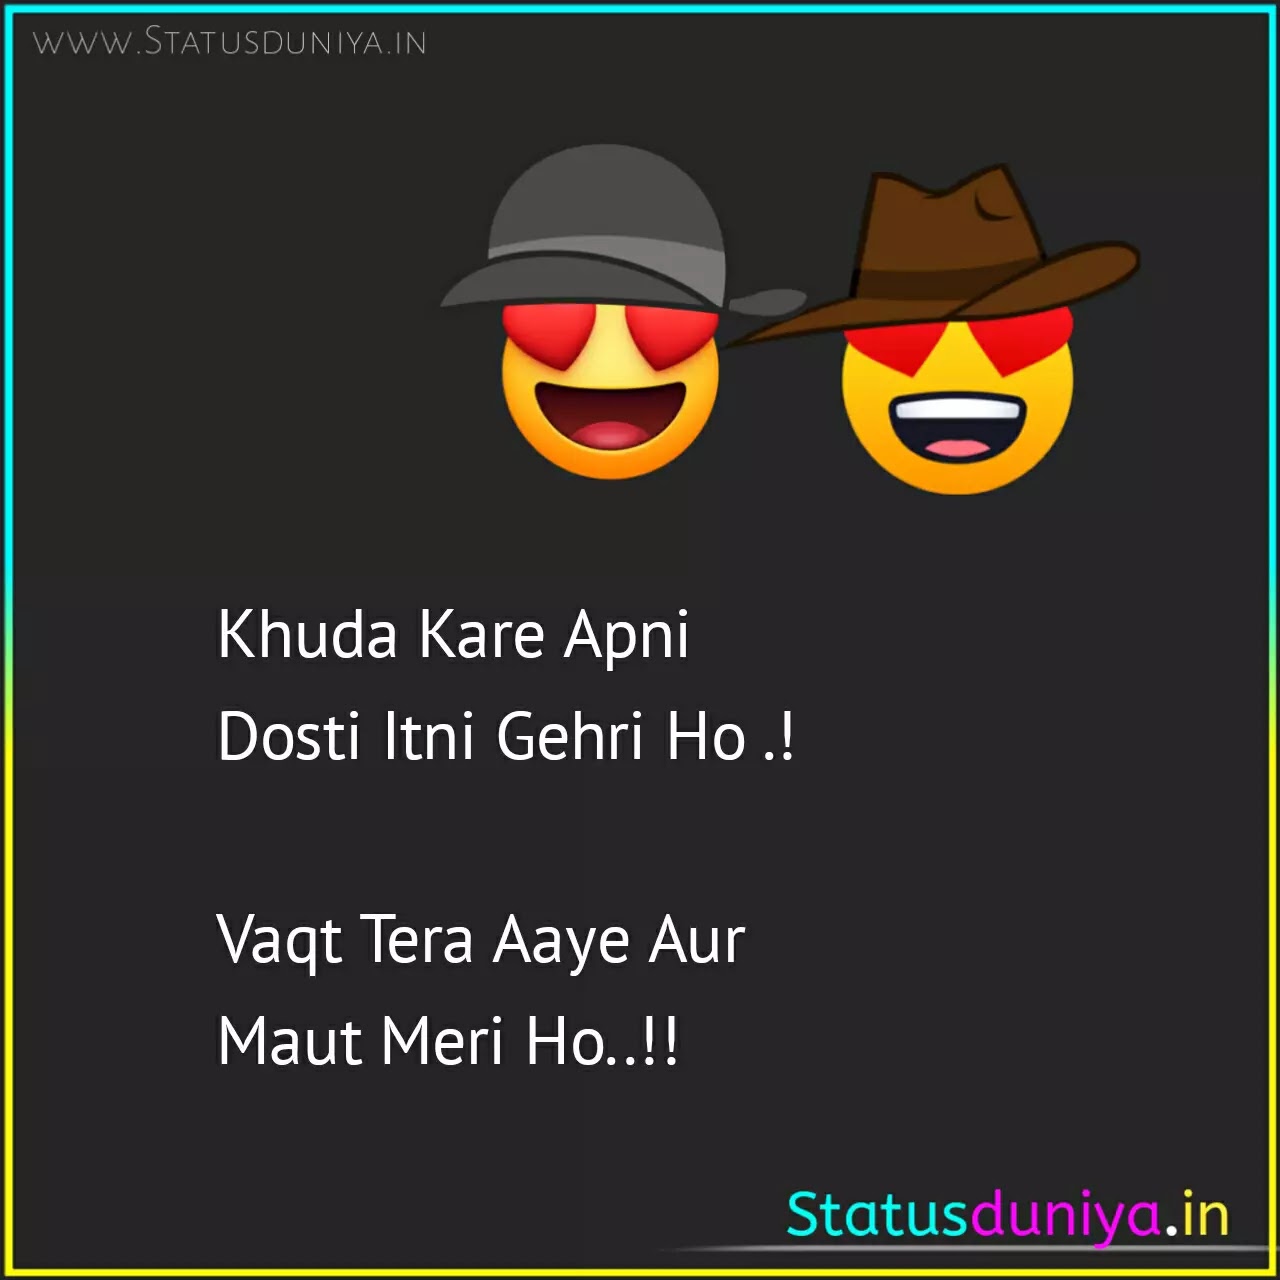 77+ Friendship Quotes In Hindi With Images For Whatsapp - Status Duniya